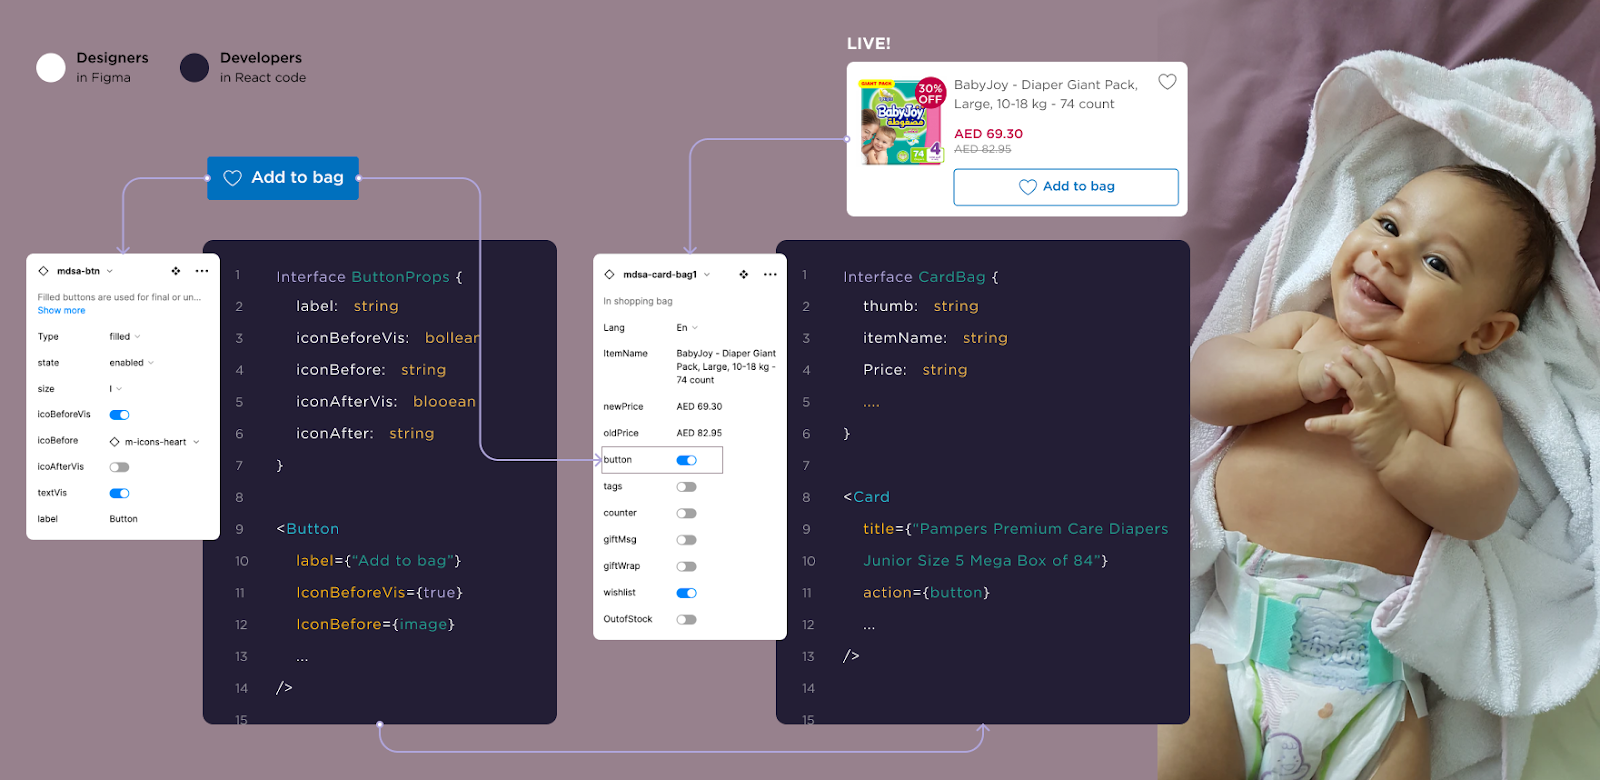 Screenshots of a designer’s screen in Figma and a developer’s screen in React show the code behind an “Add to bag” button on a baby product website. A baby smiles on the right side of the screen.